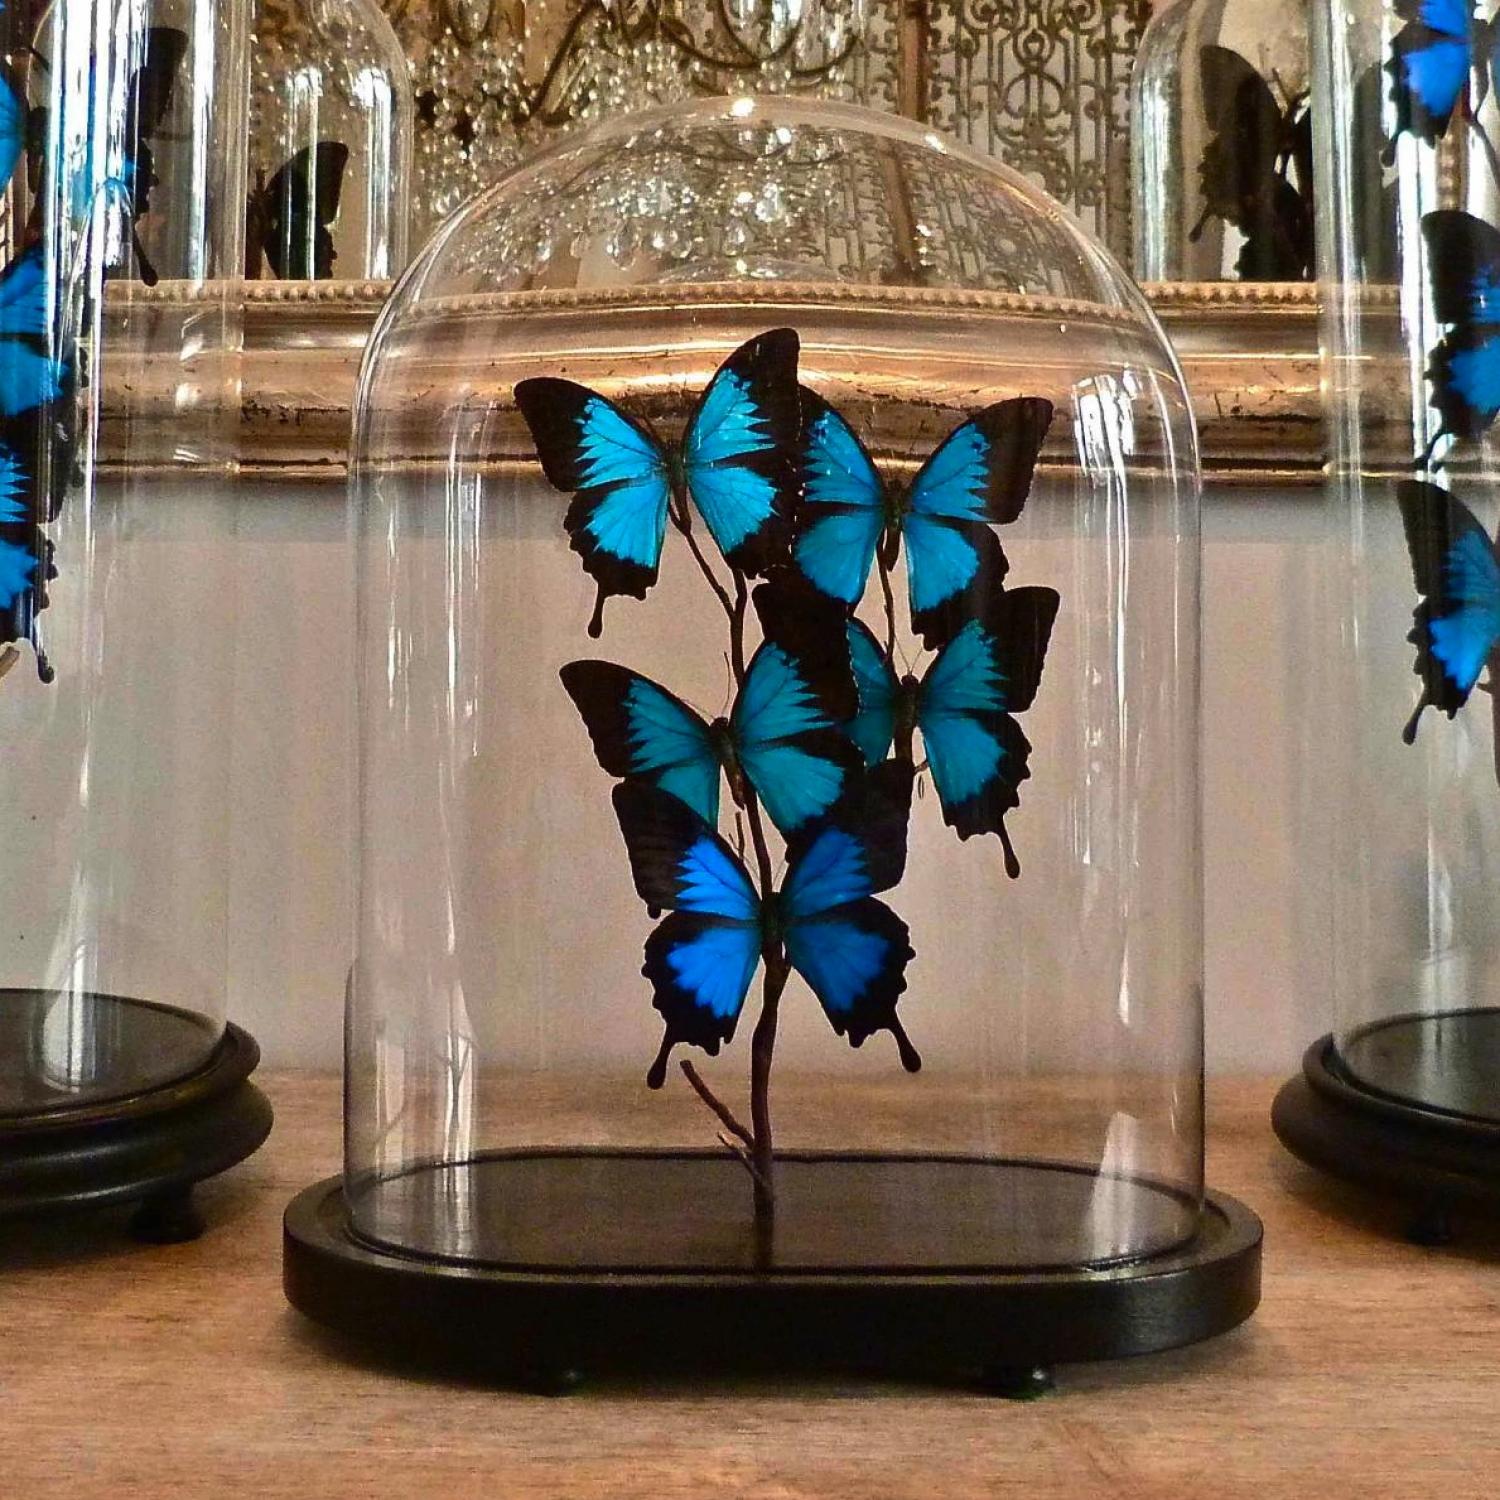 VINTAGE DOME WITH BEAUTIFUL PAPILIO ULYSSES BUTTERFLIES